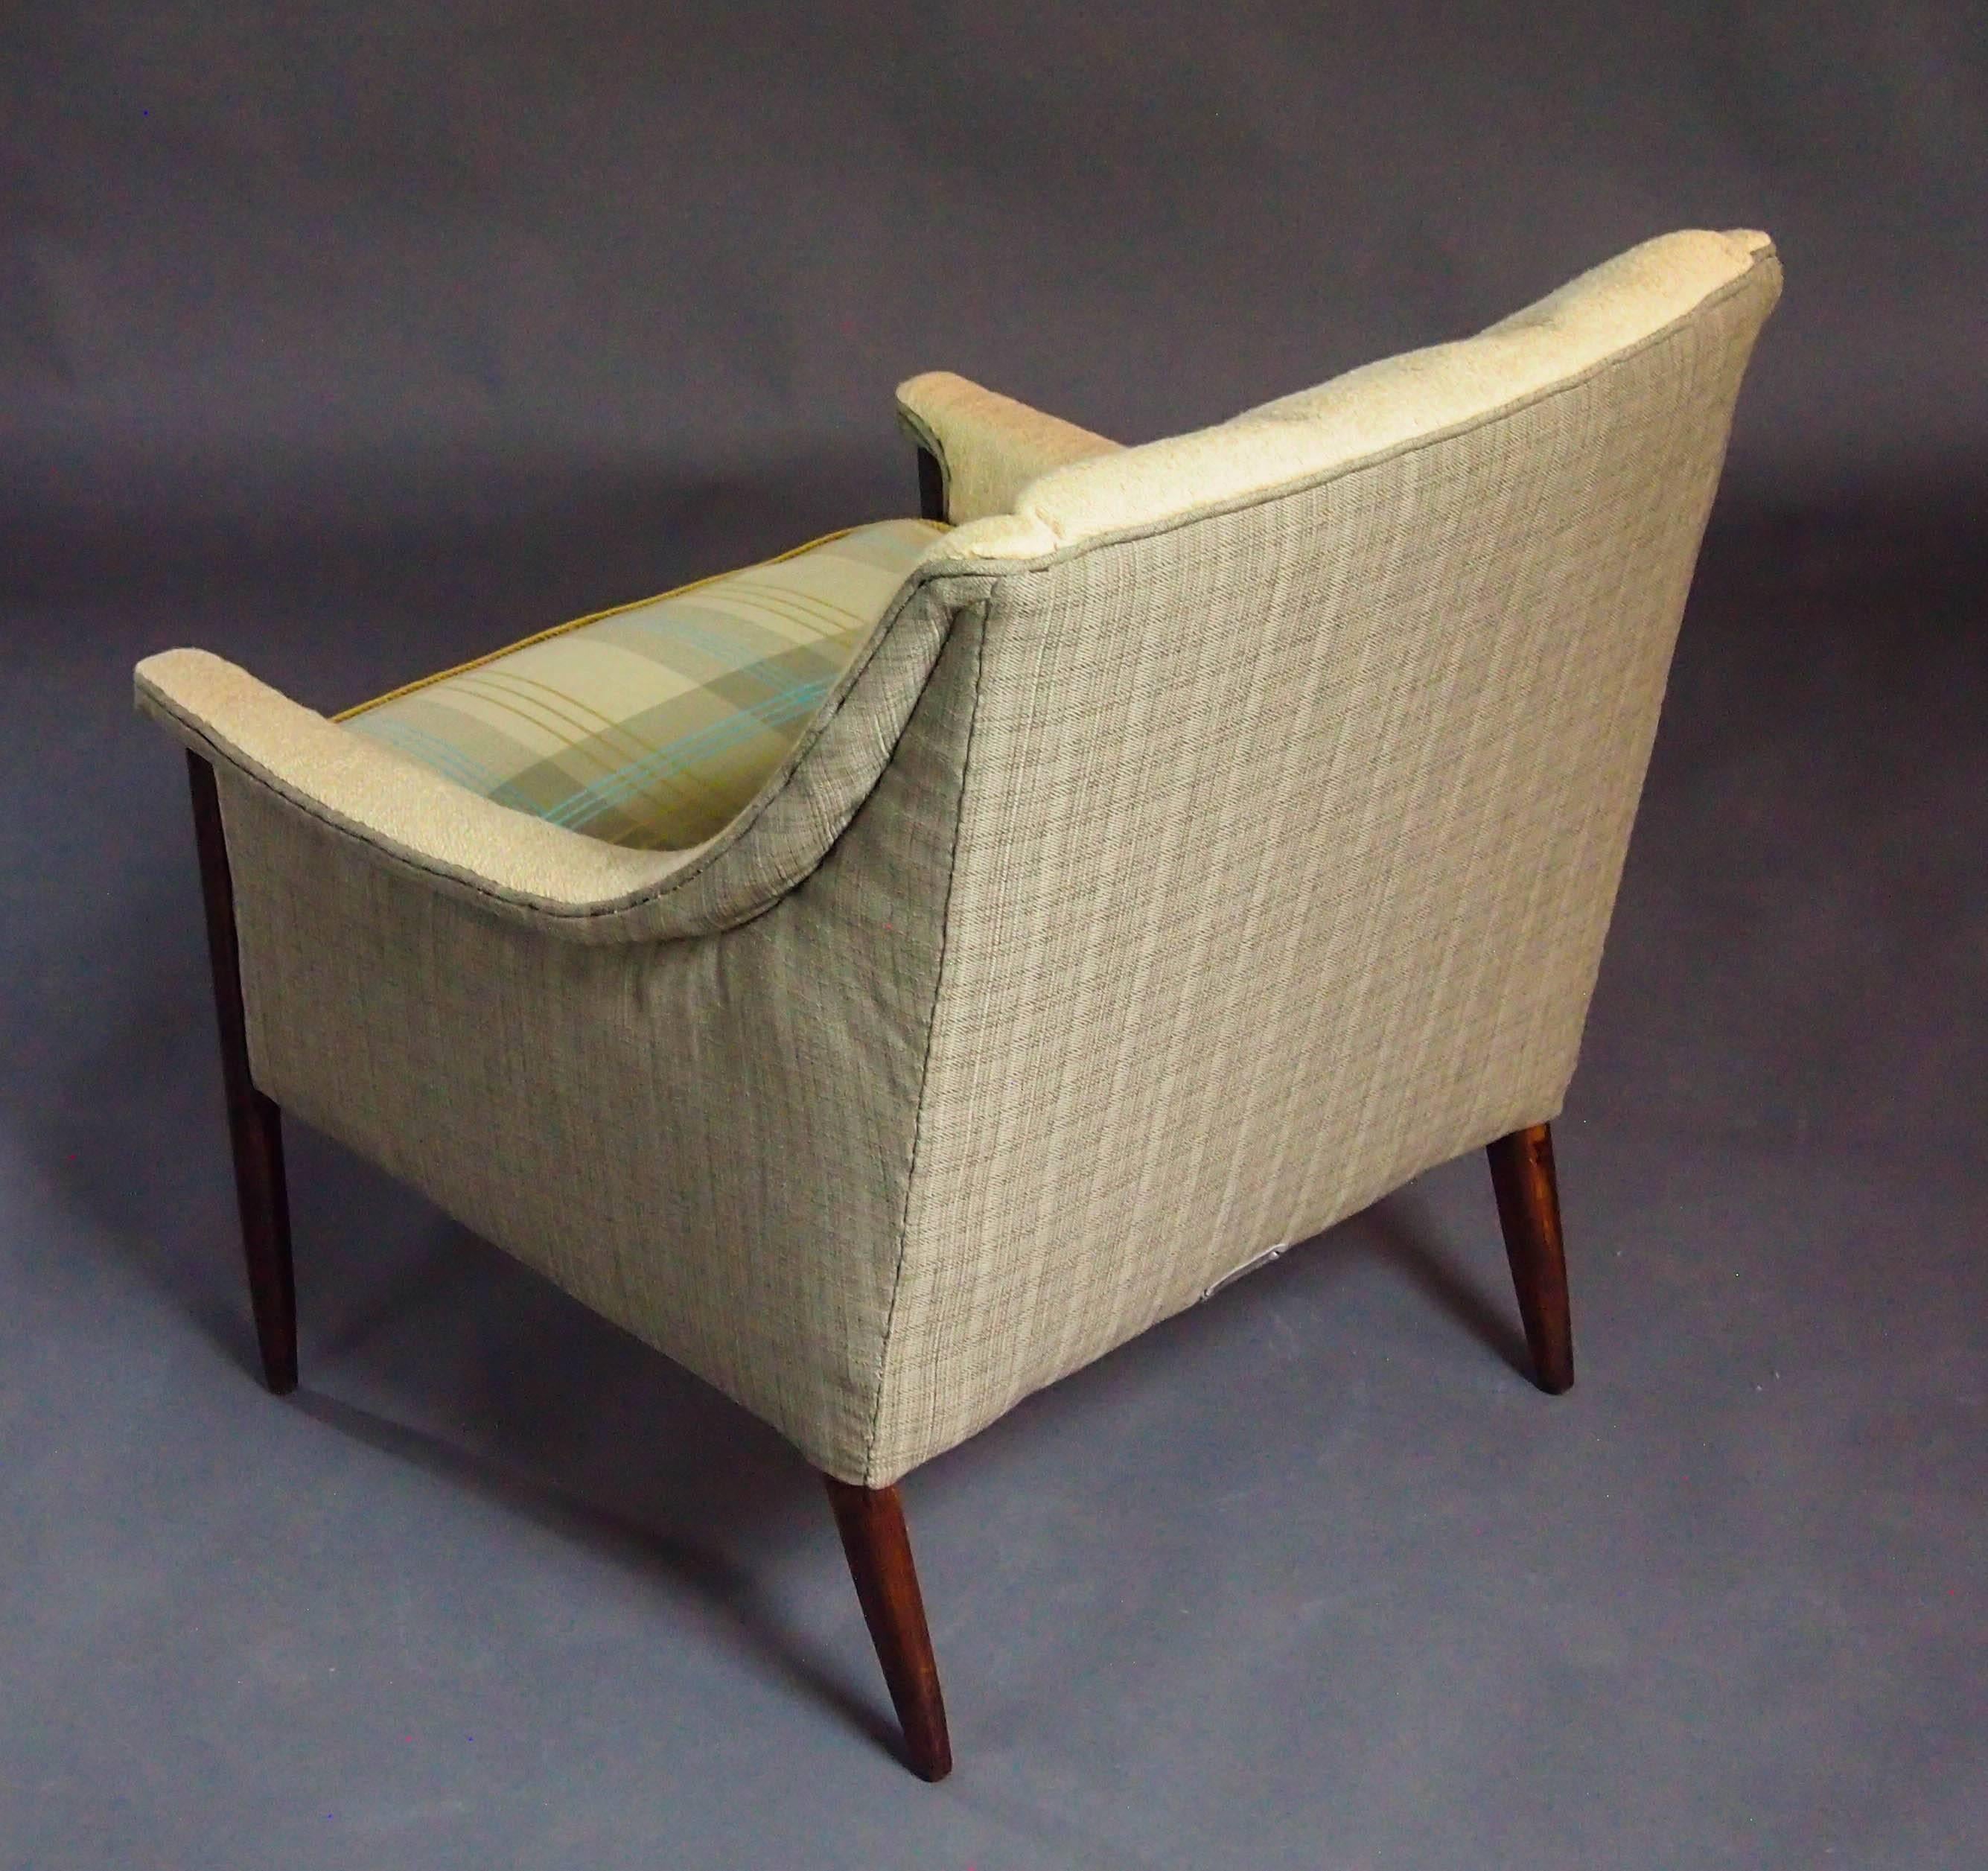 20th Century Mid-Century Koehler Armchair in Ivory with Tan and Blue--in stock For Sale